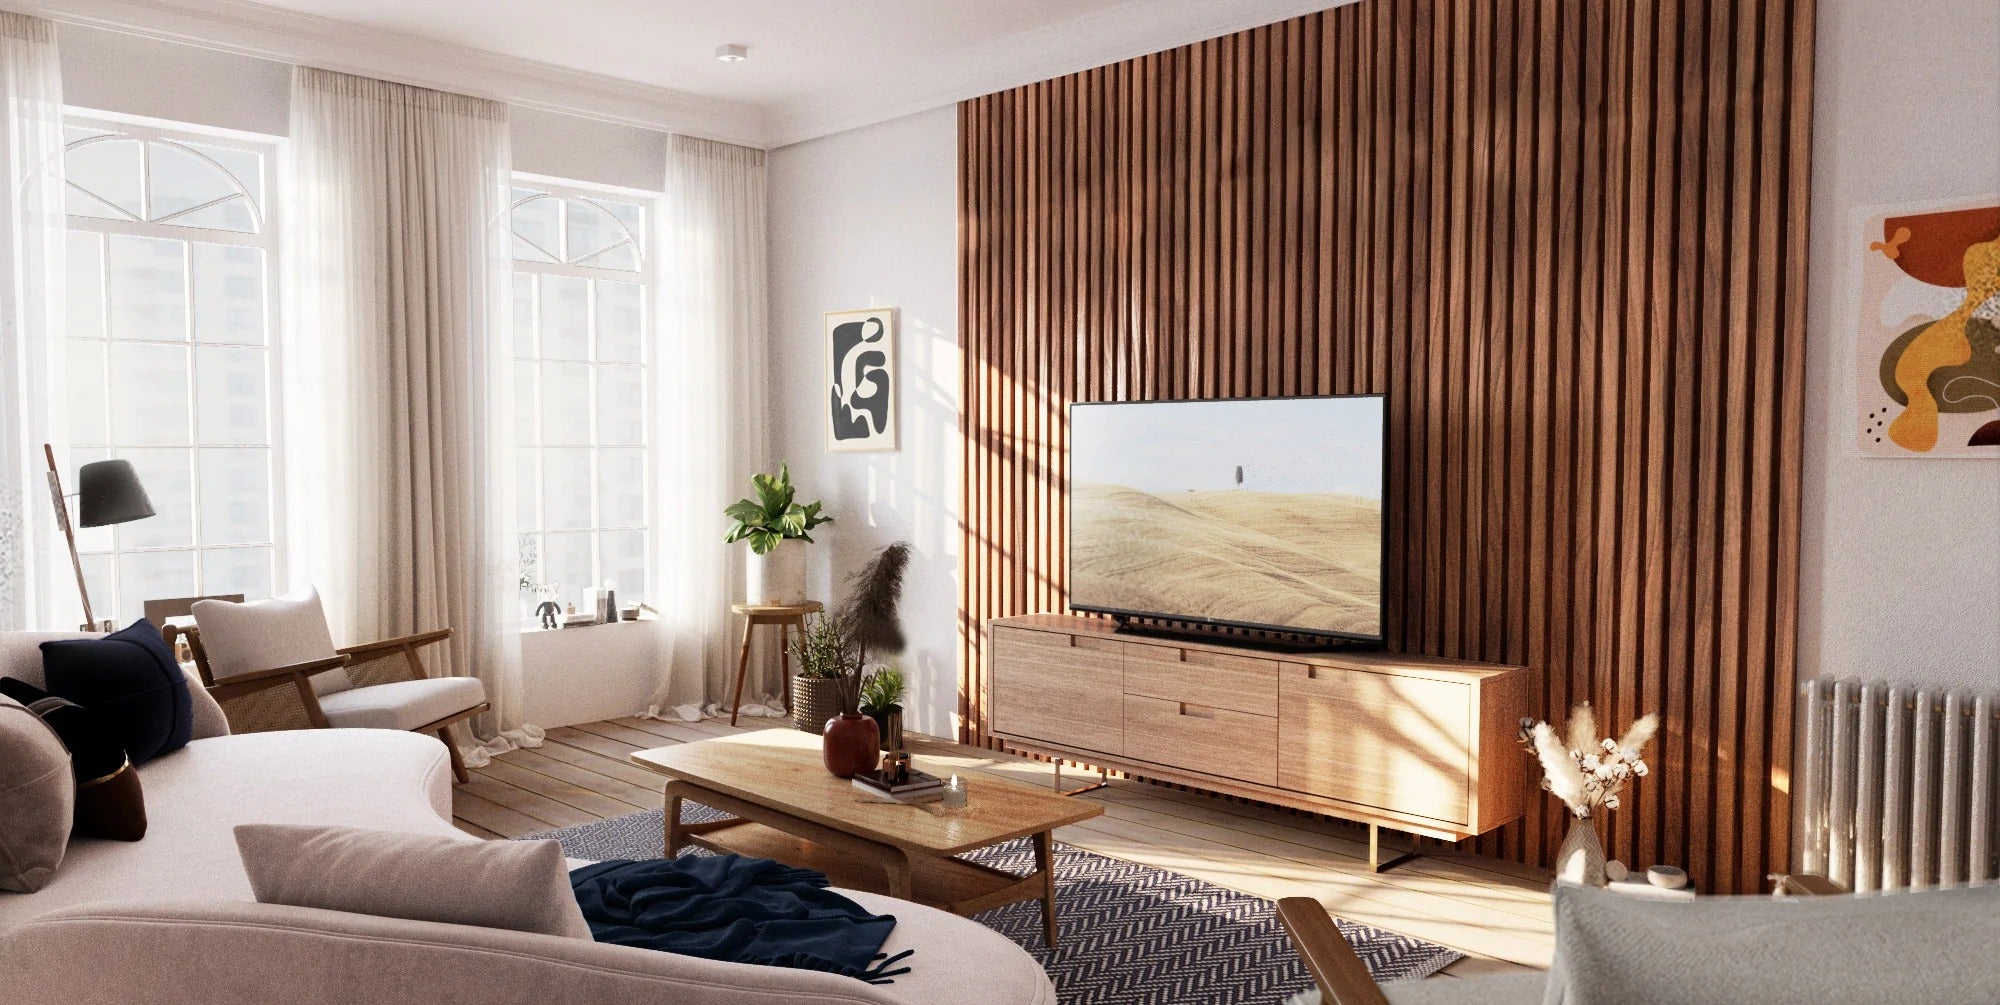 A cozy living room with a sofa, coffee table, and television against a wood wall panel accent wall. When made from eco-friendly materials, these wood slat walls are a beautiful example of sustainable interior design.